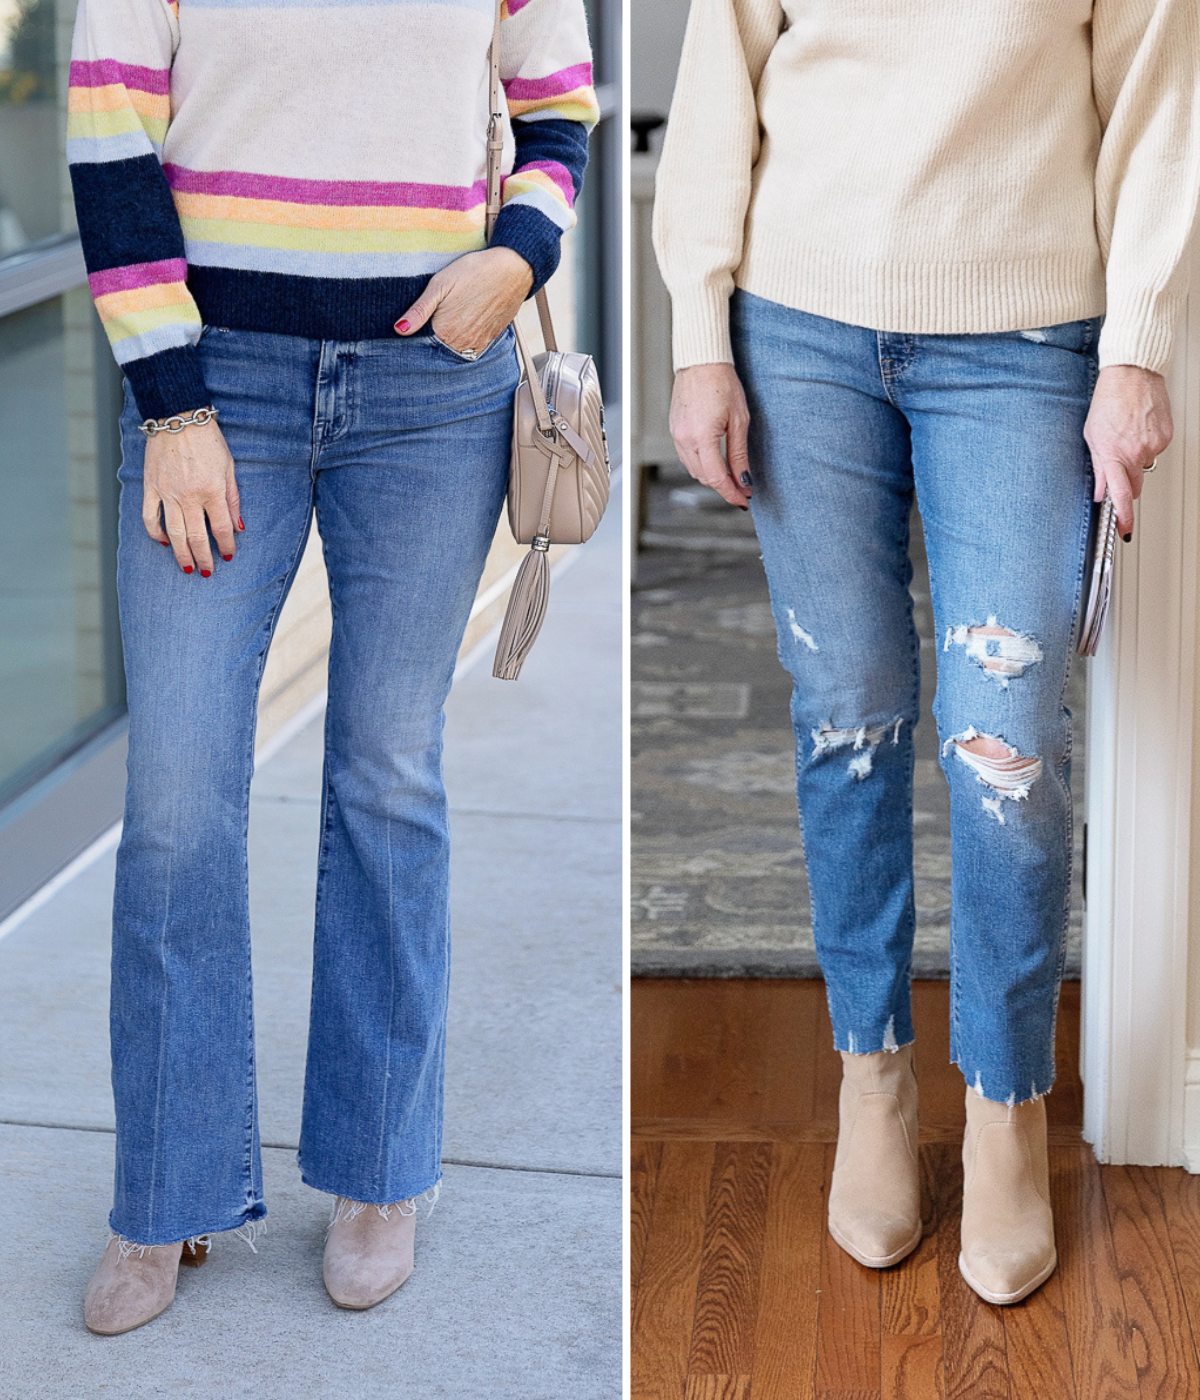 Butt rip jeans are the latest terrible jeans trend that we